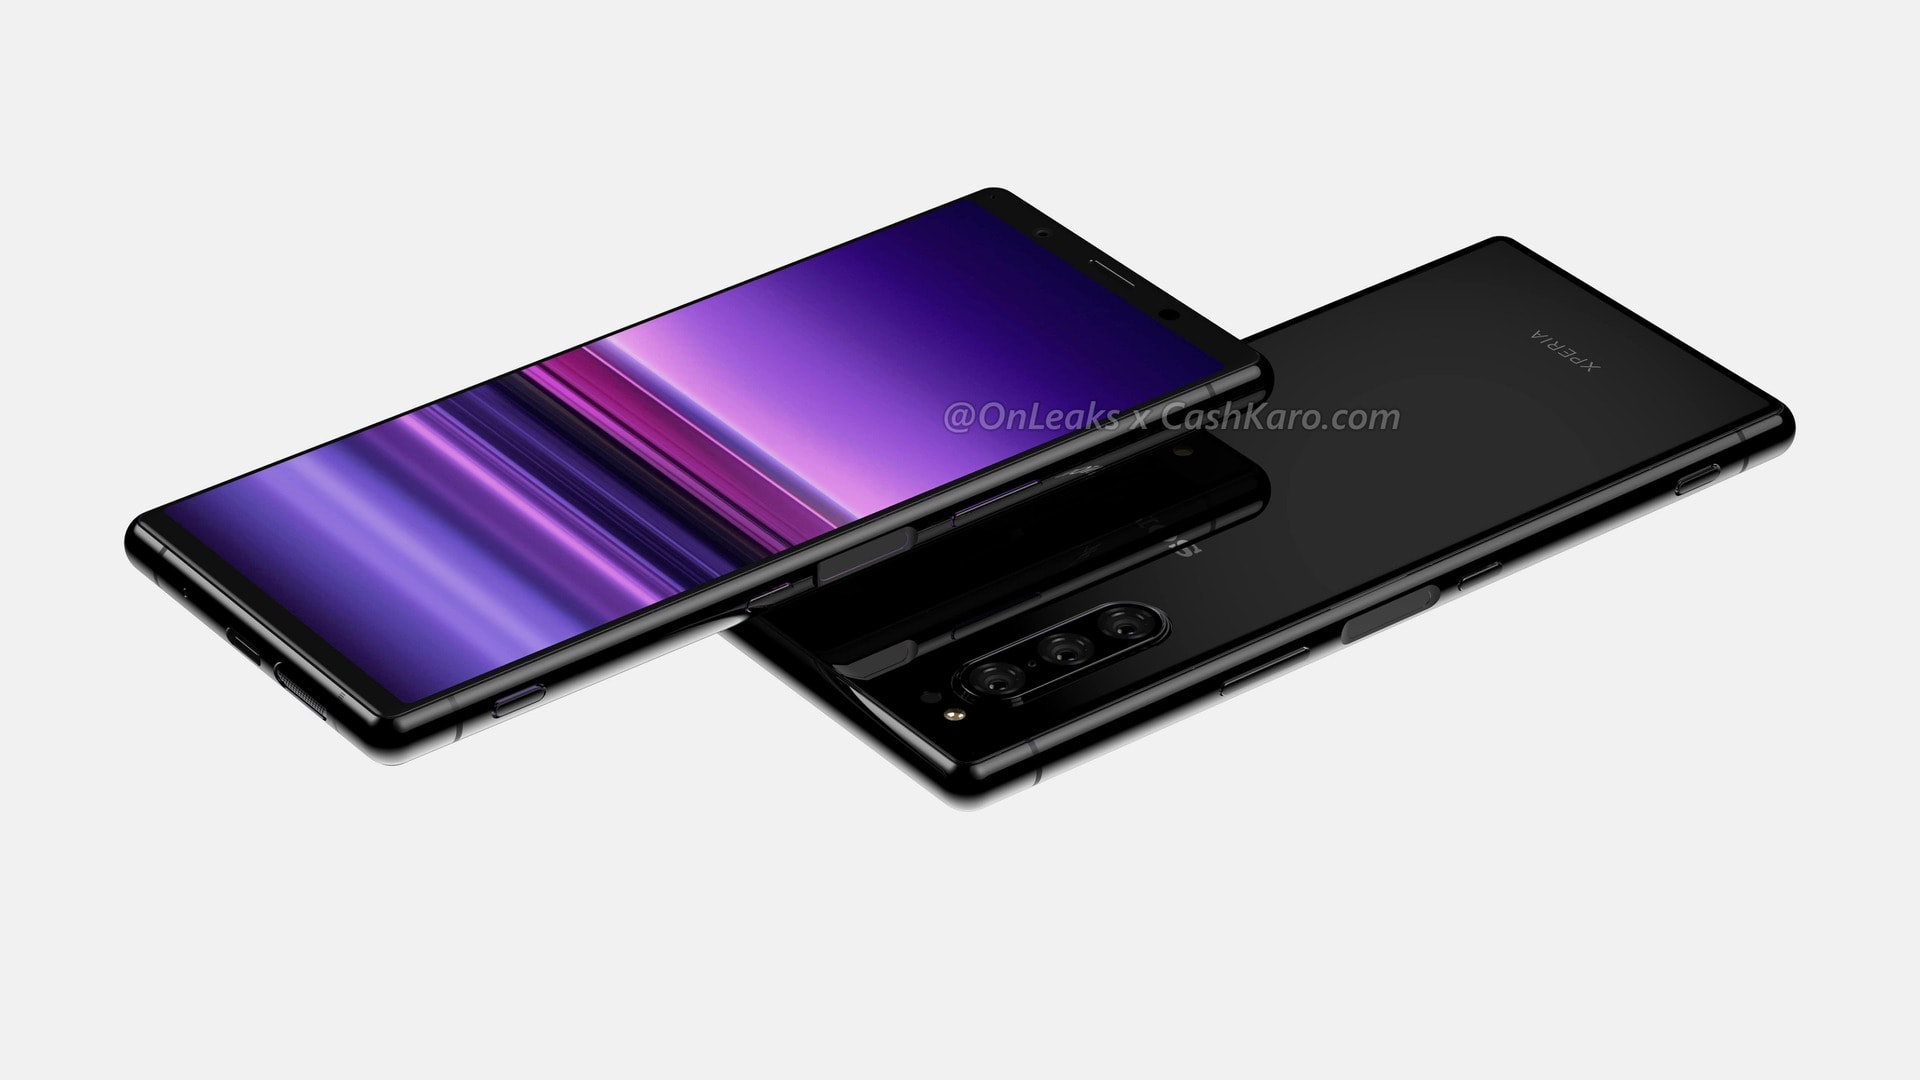 Sony Xperia 2 just leaked, with Xperia 1 pre-orders still not 